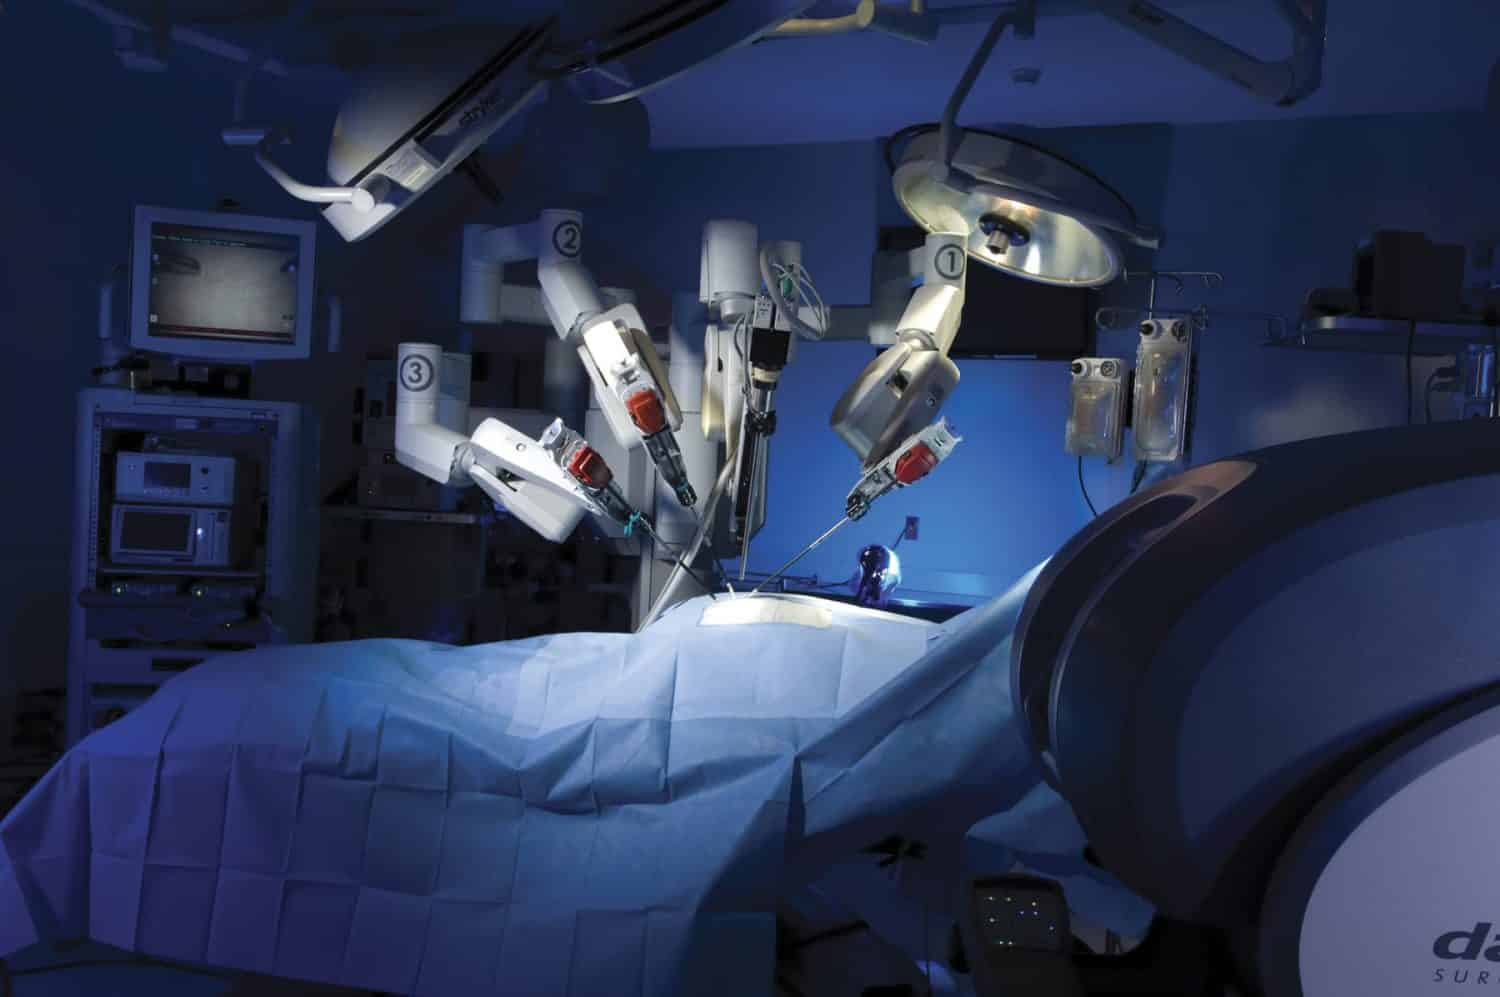 Robots for medical use – a cure to illnesses or a disease to kill?